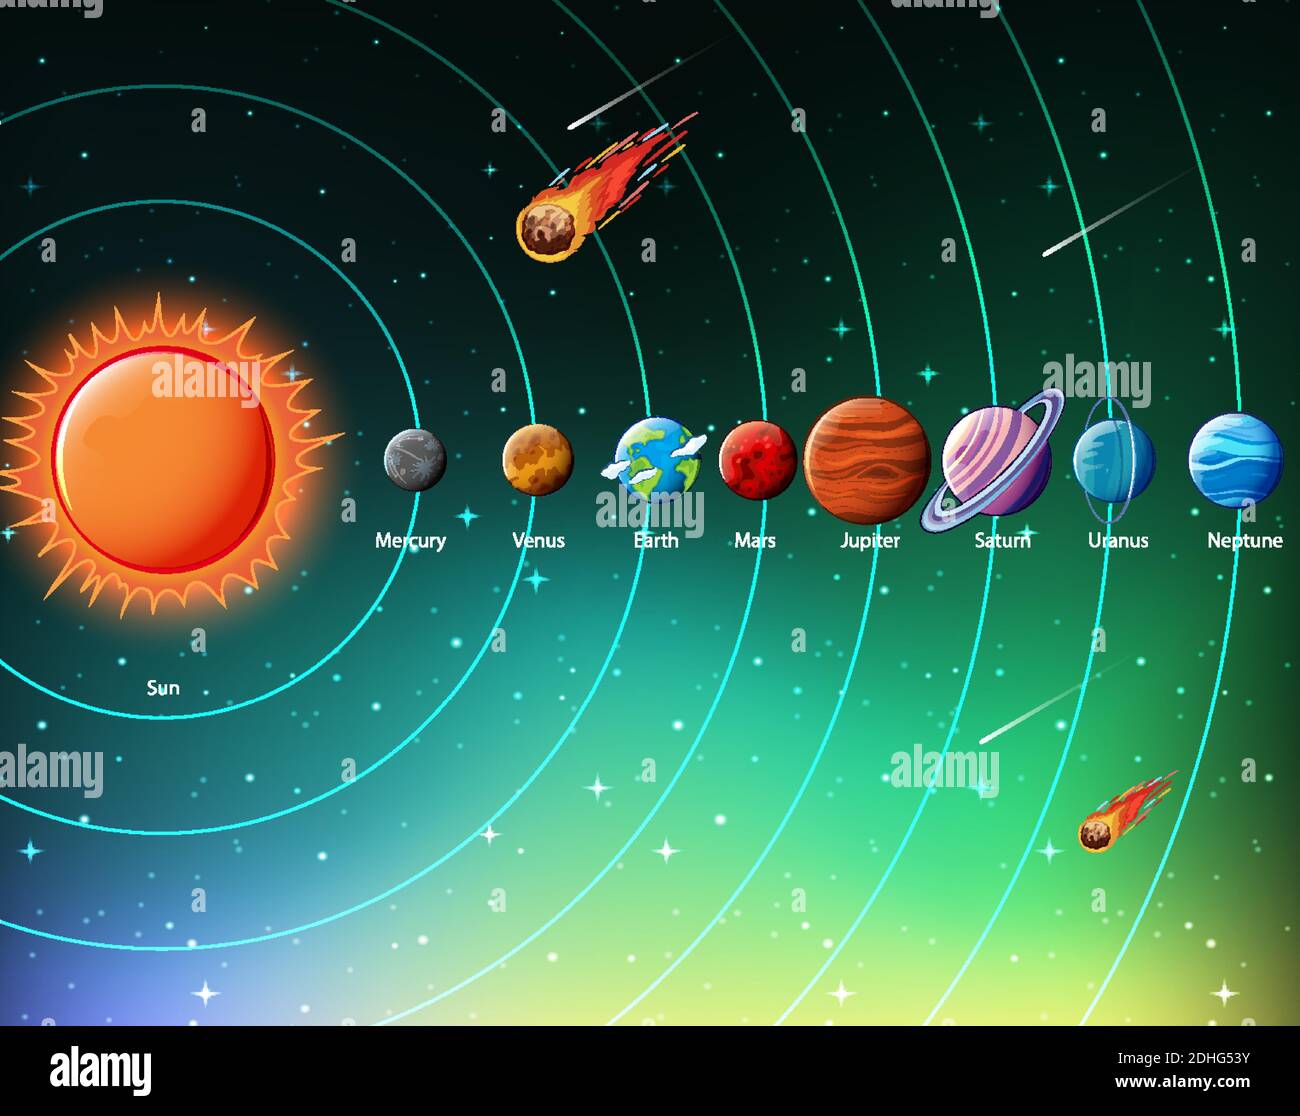 Planets of the solar system infographic illustration Stock Vector Image ...